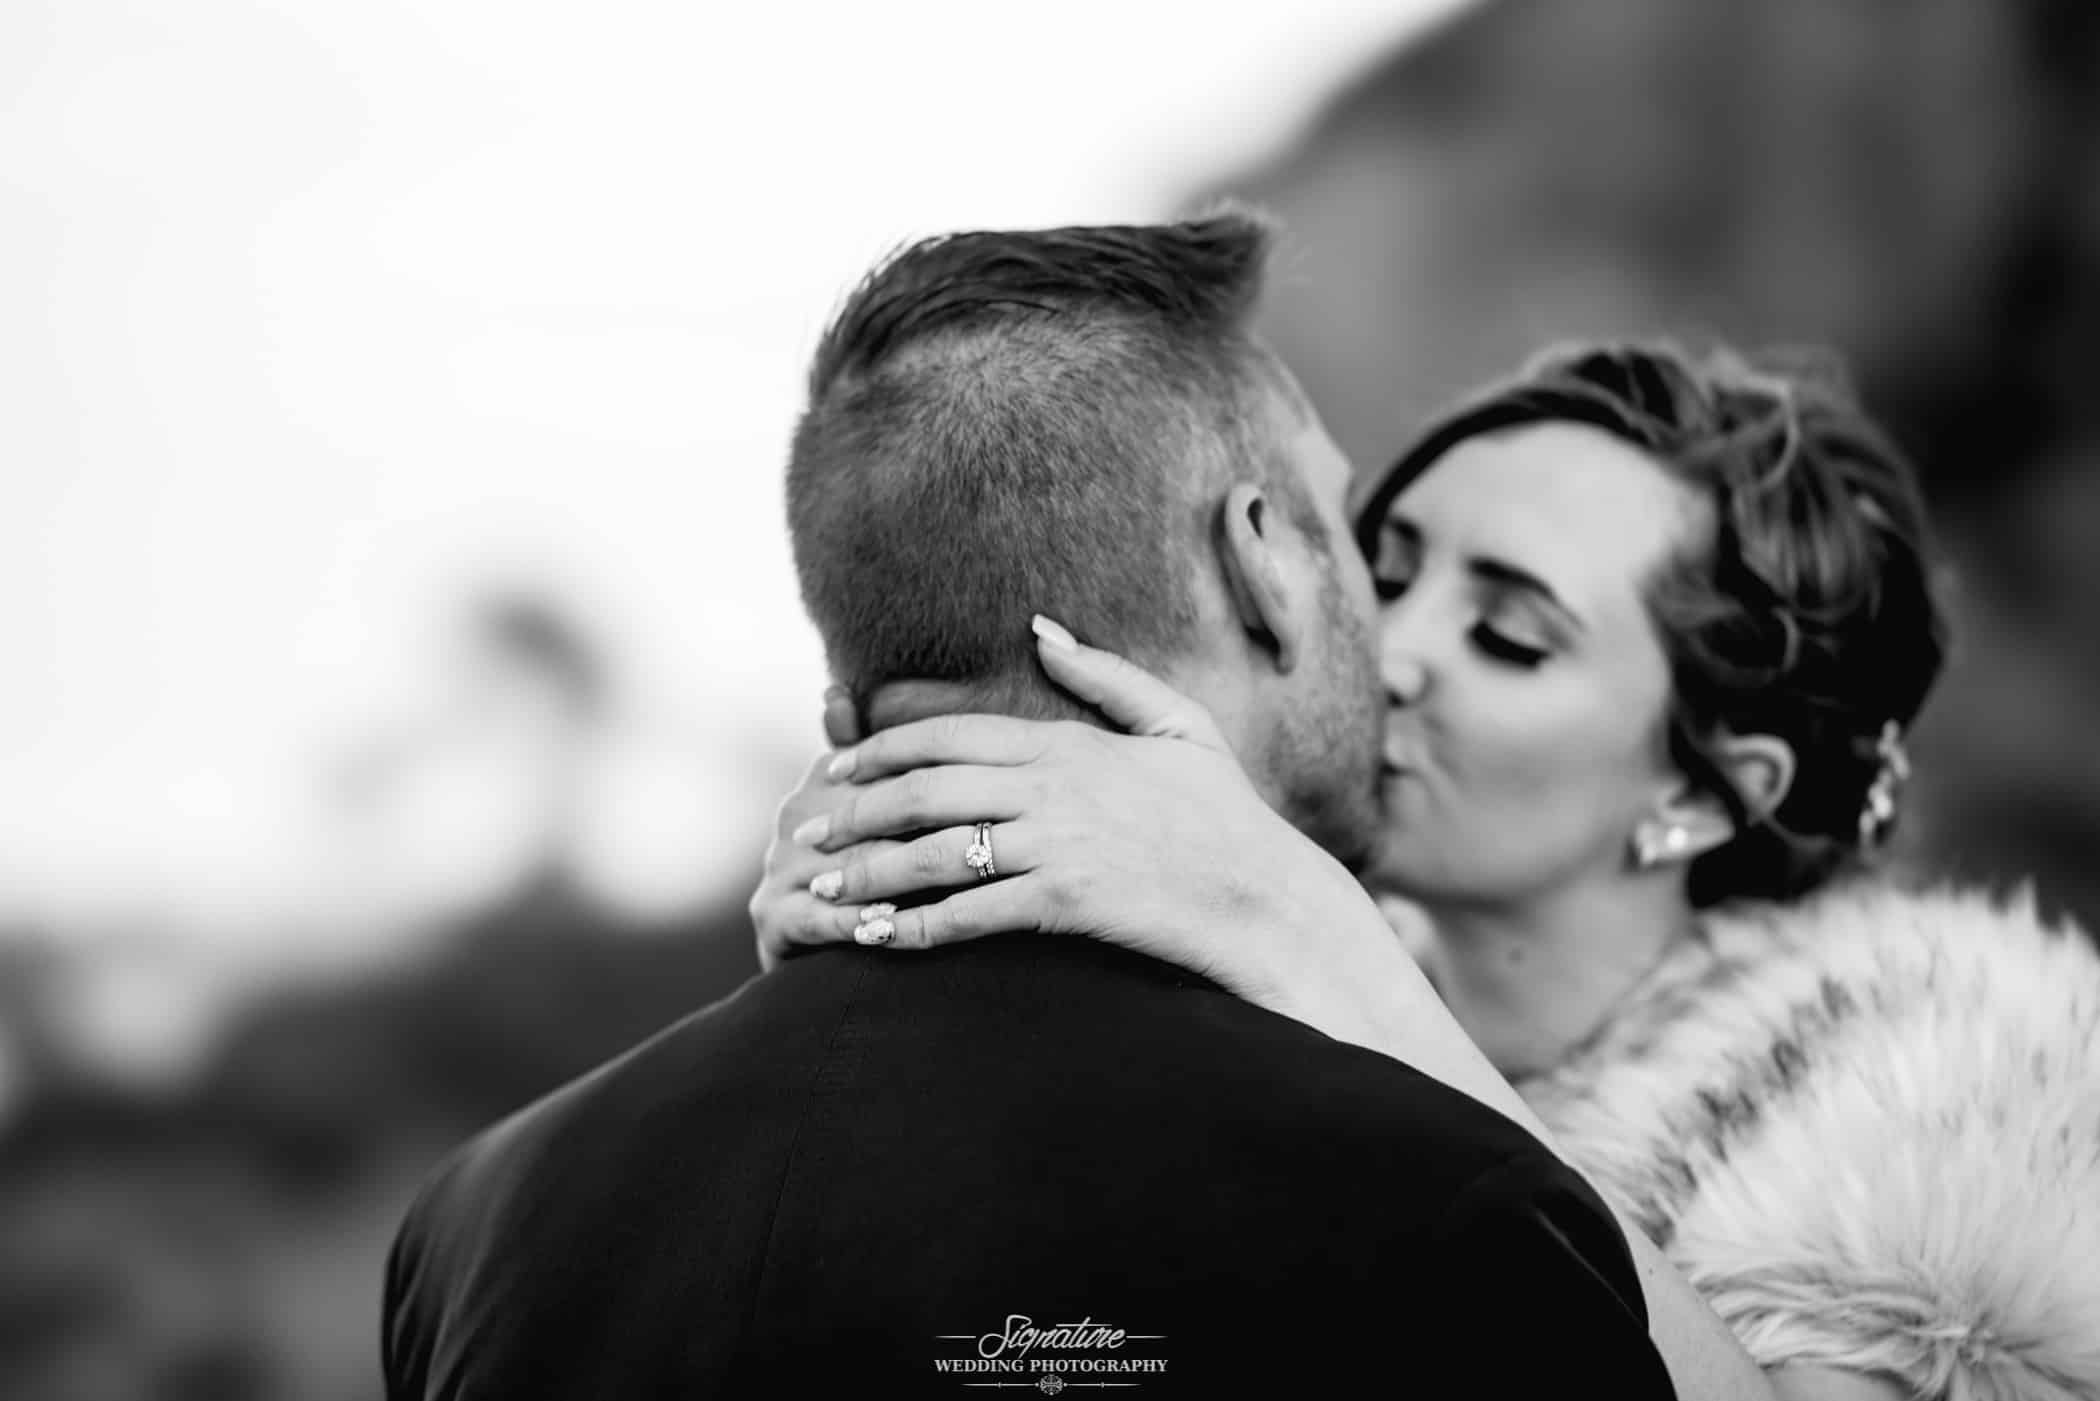 Close up of ring while bride and groom kiss black and white